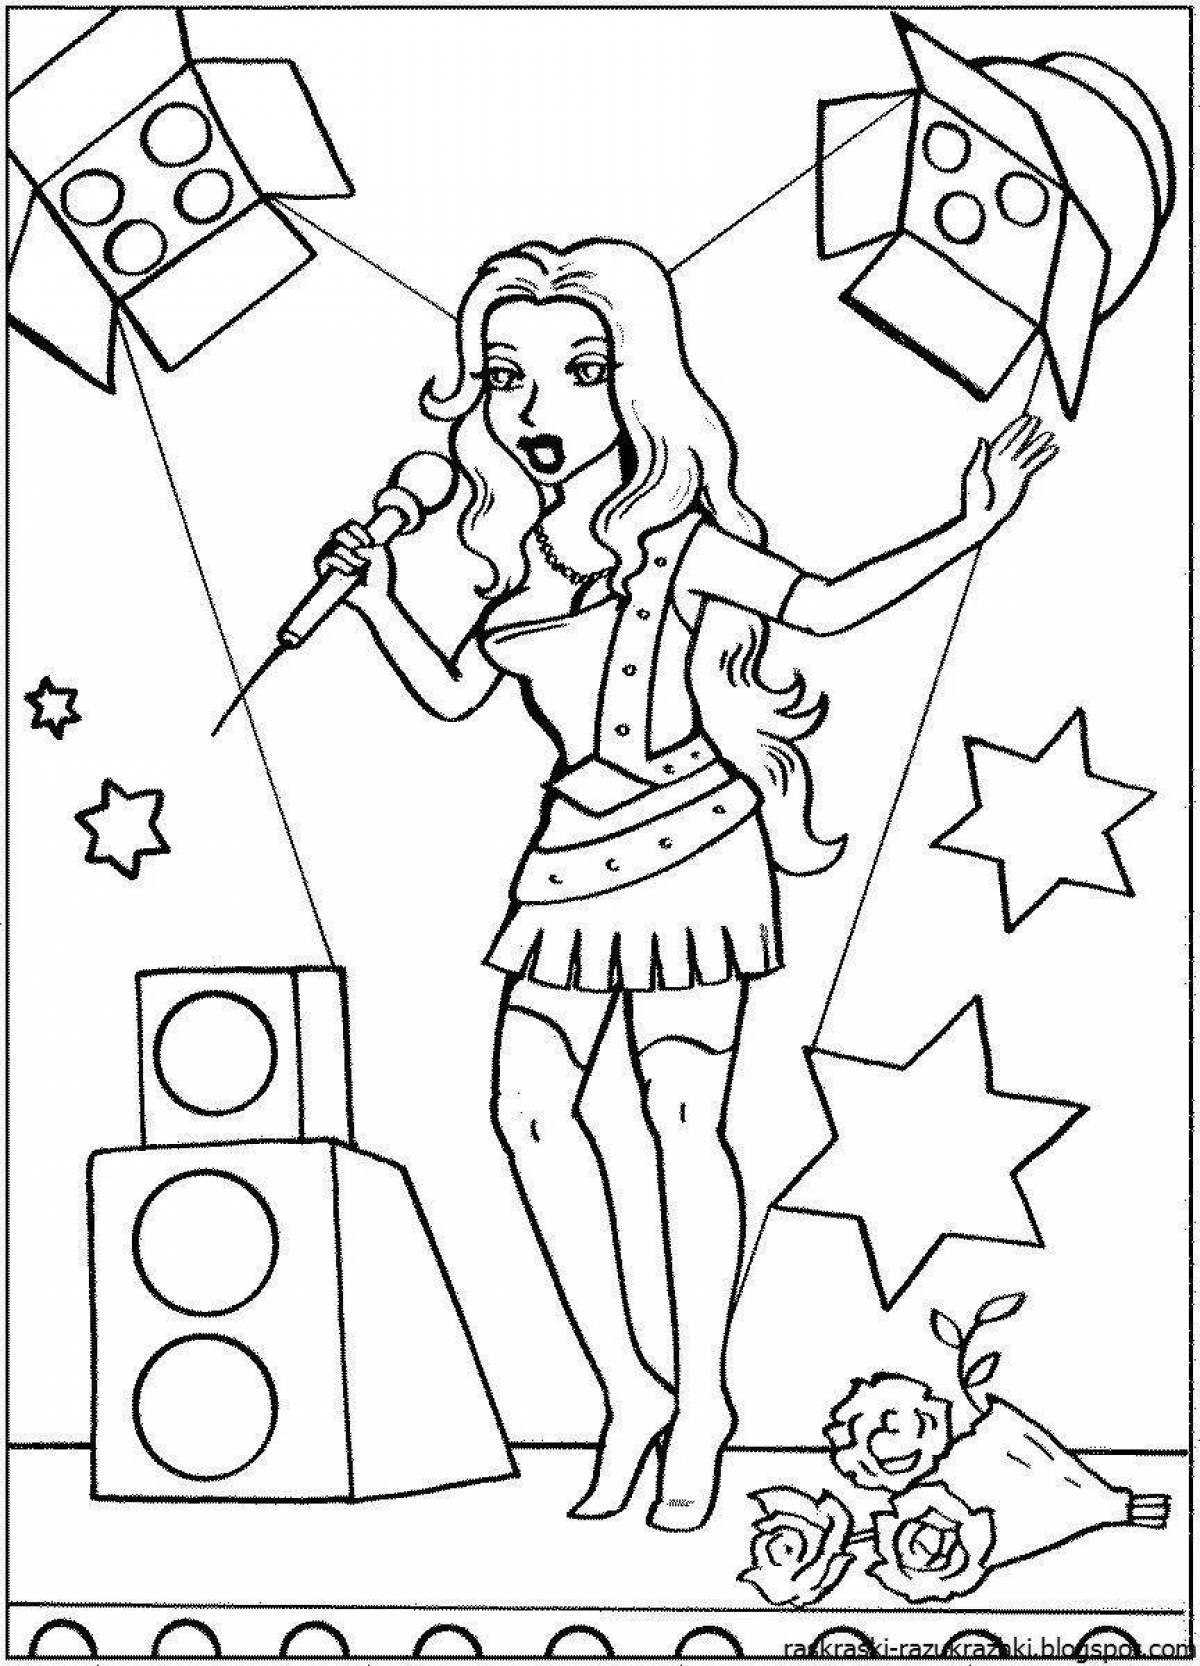 Animated coloring book singer for kids